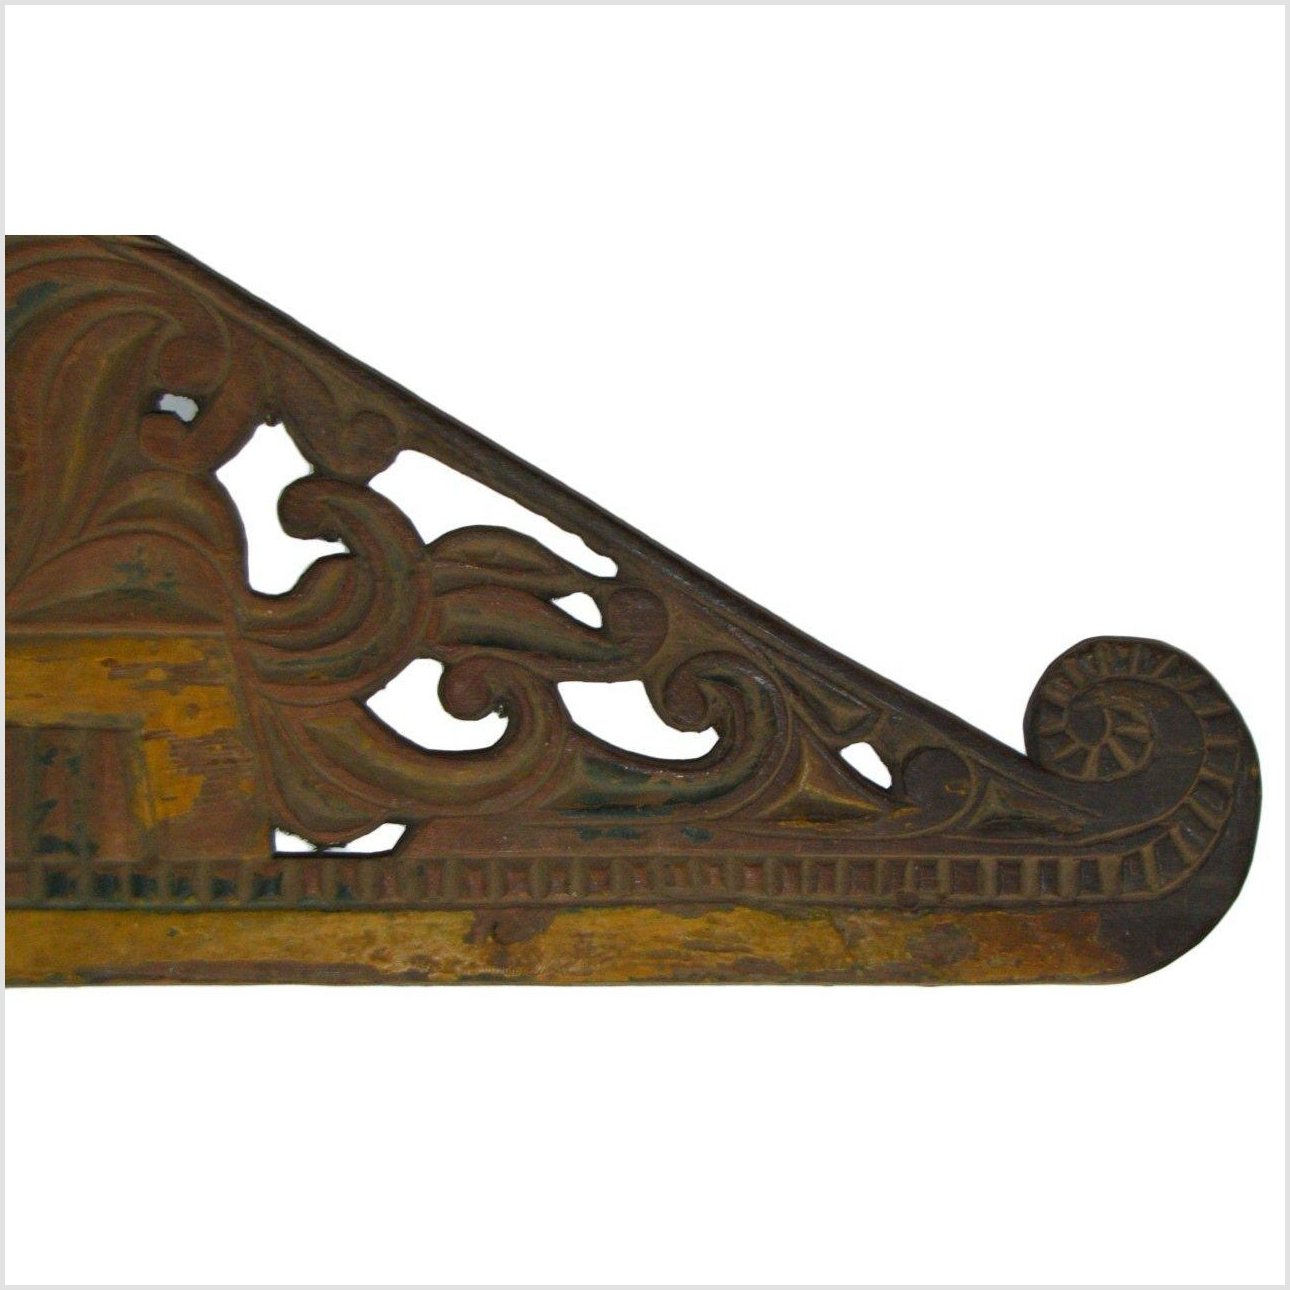 Antique Hand-Carved Wall Ornament-YN2982-1. Asian & Chinese Furniture, Art, Antiques, Vintage Home Décor for sale at FEA Home